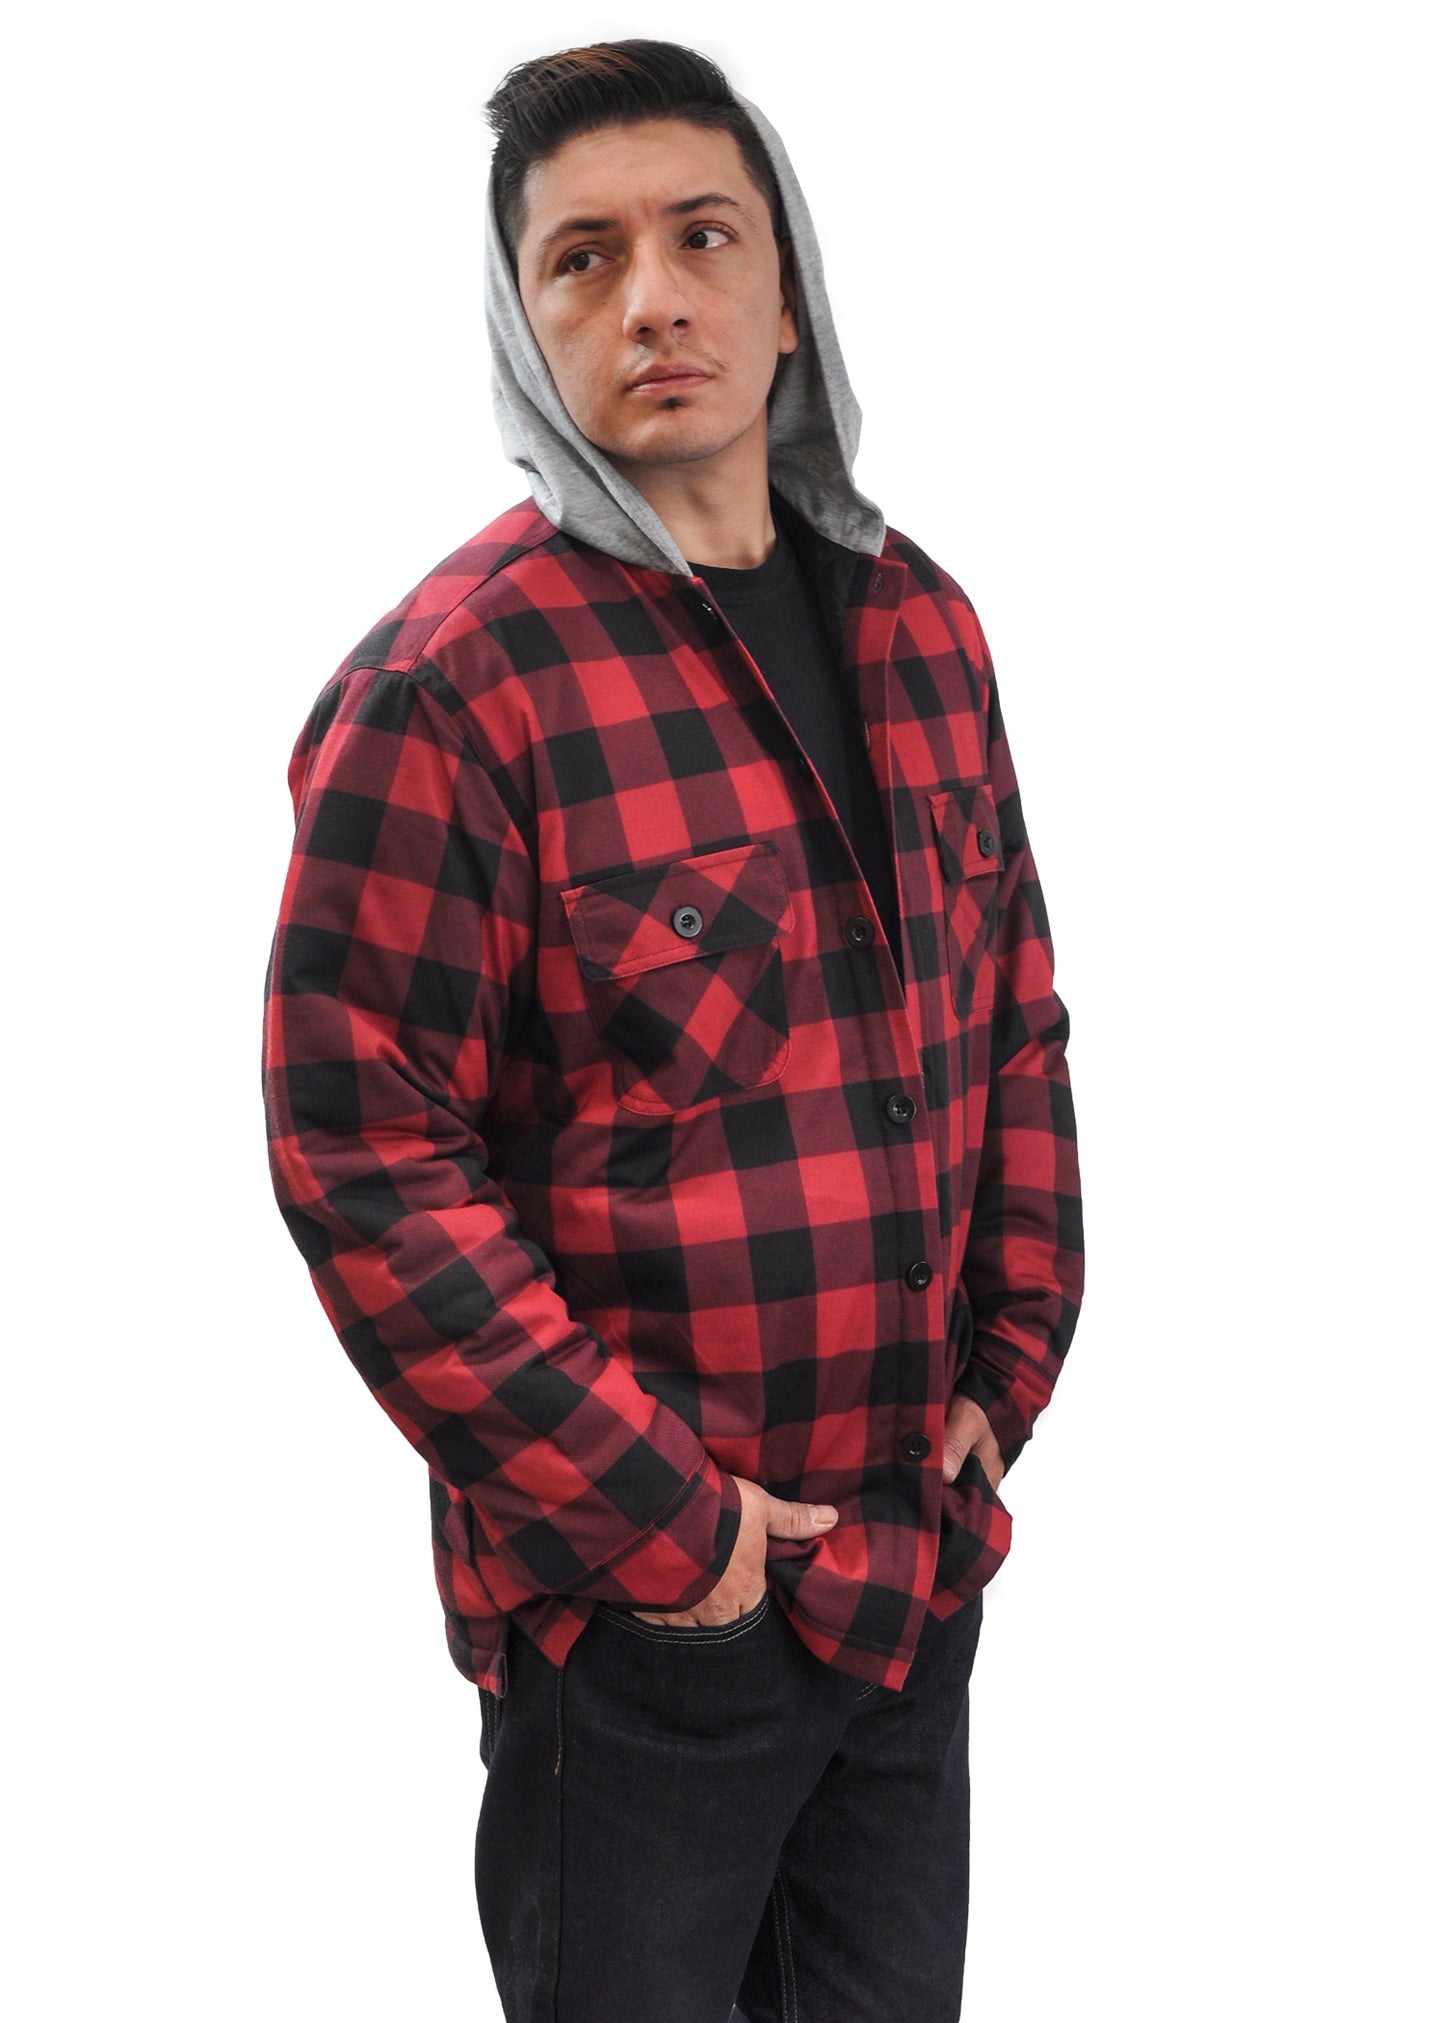 Young USA® Men's 100% Polyester Jacket with Hood, Plaid Flannel